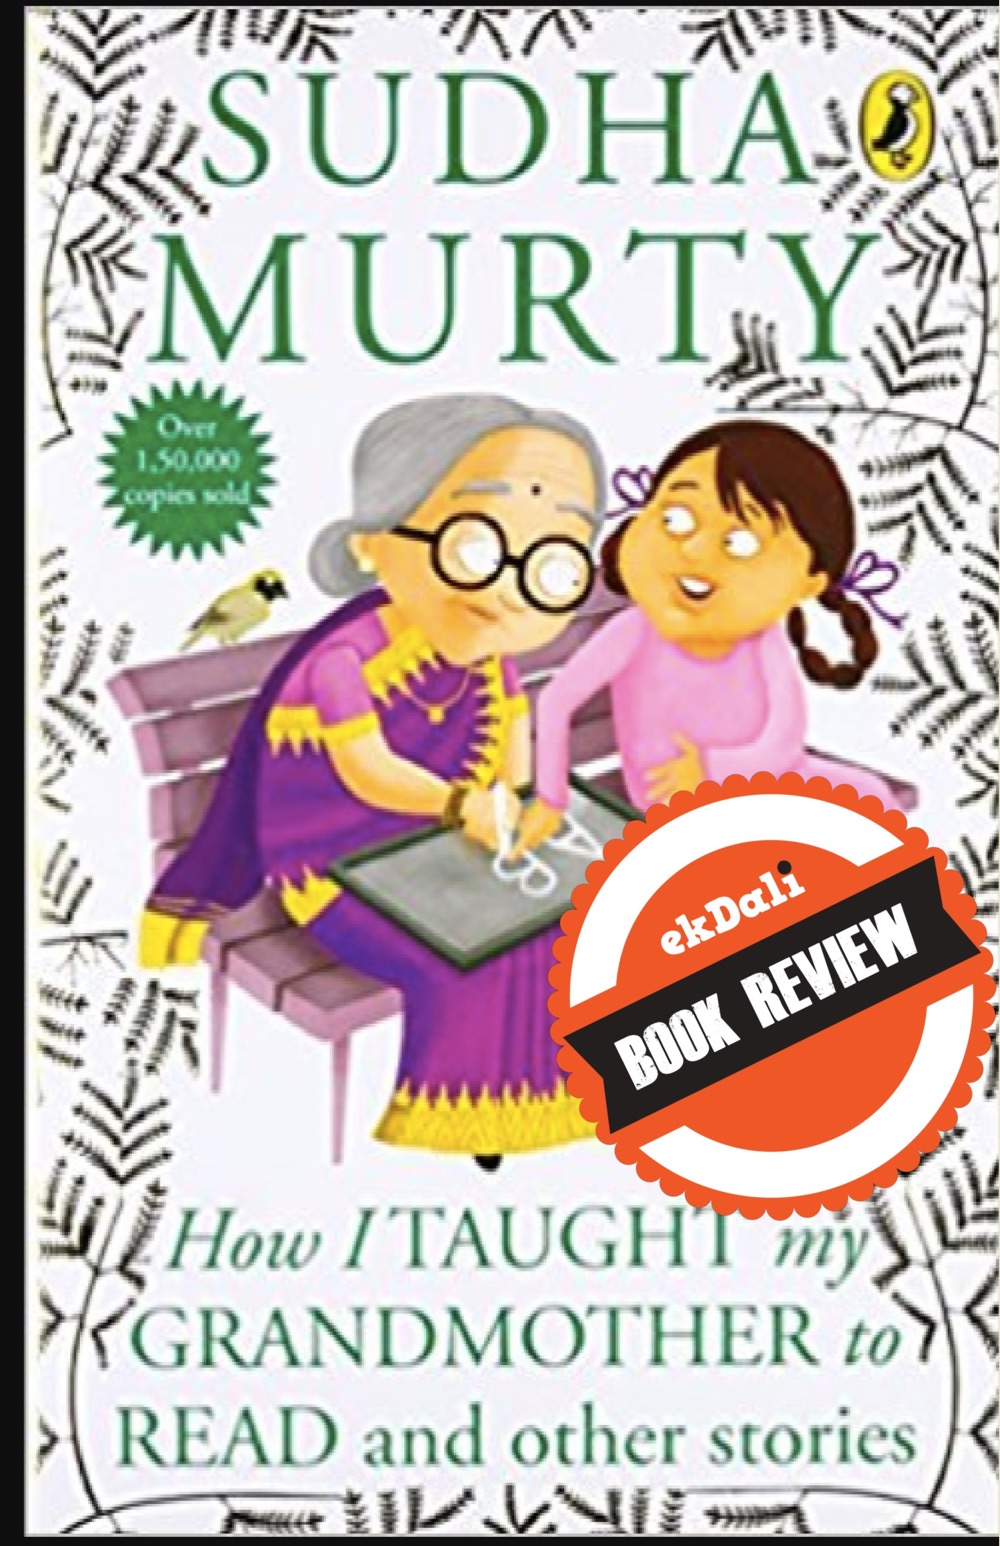 Book Review: How I Taught My Grandmother to Read and other short stories